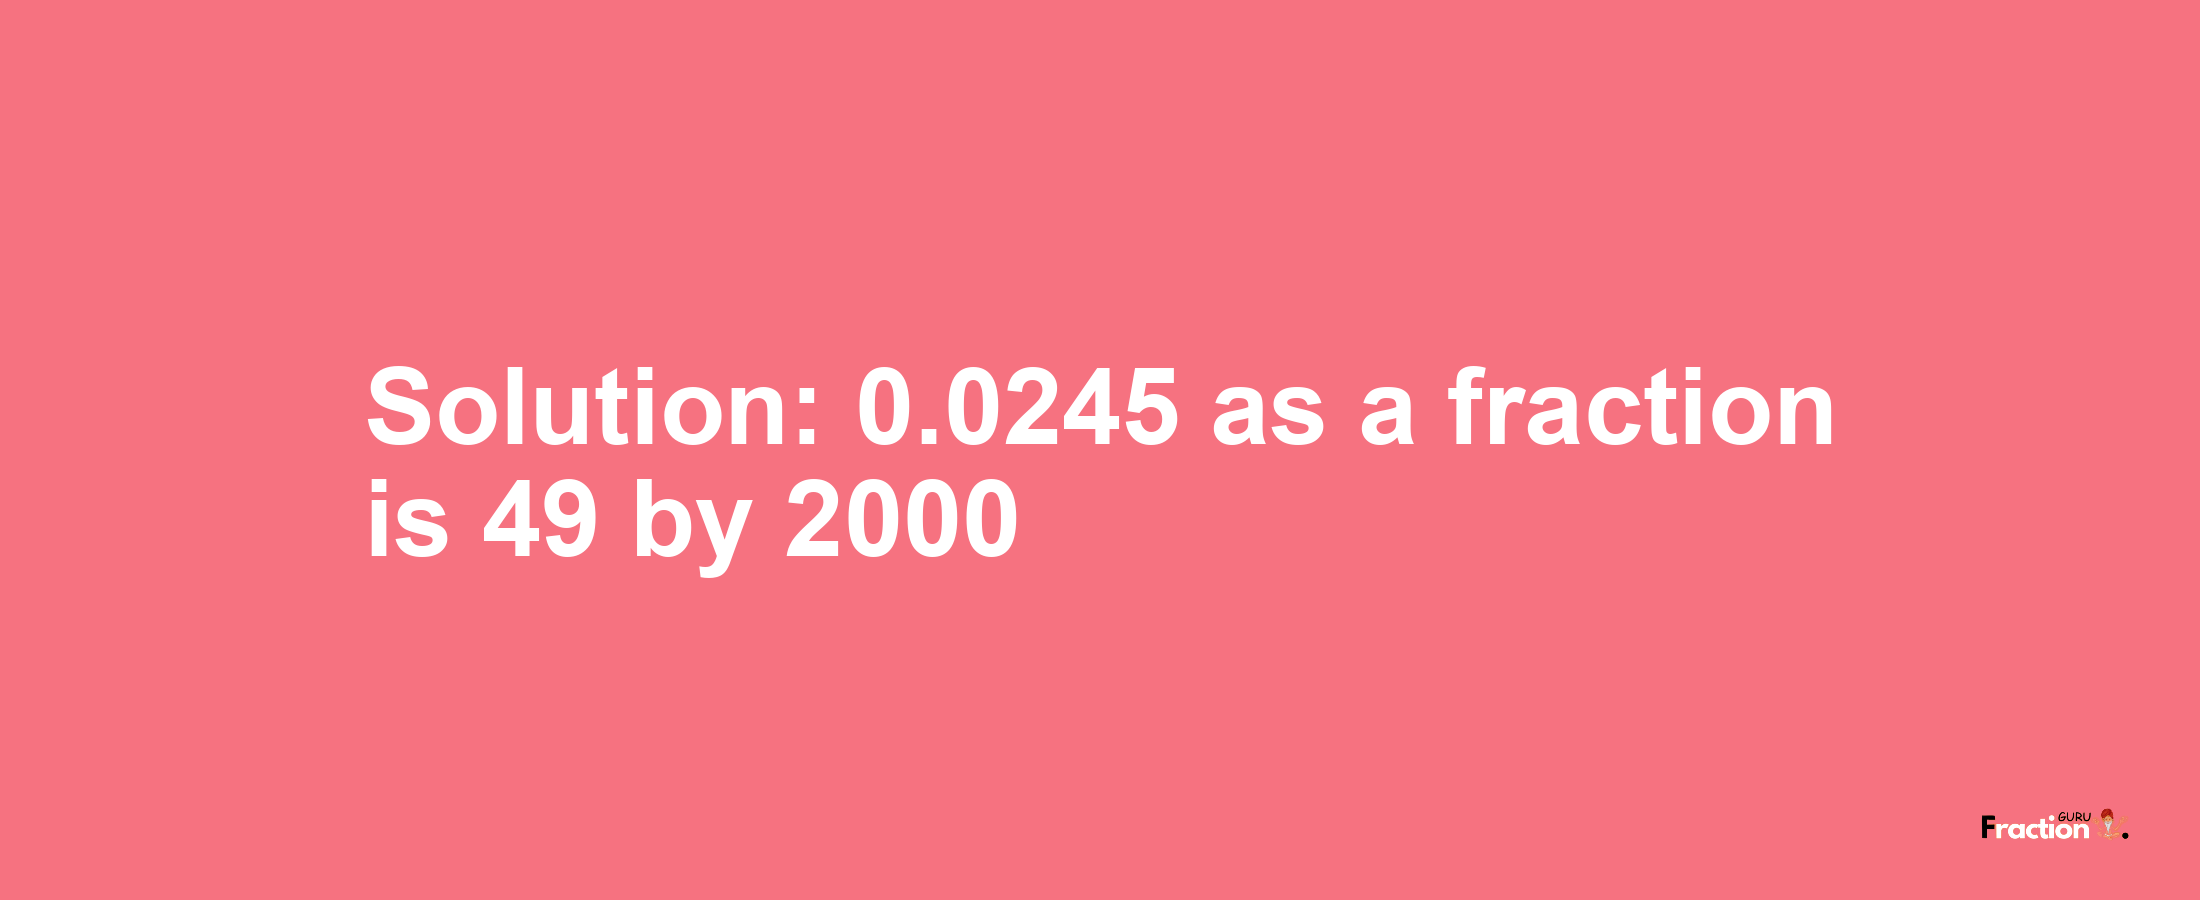 Solution:0.0245 as a fraction is 49/2000